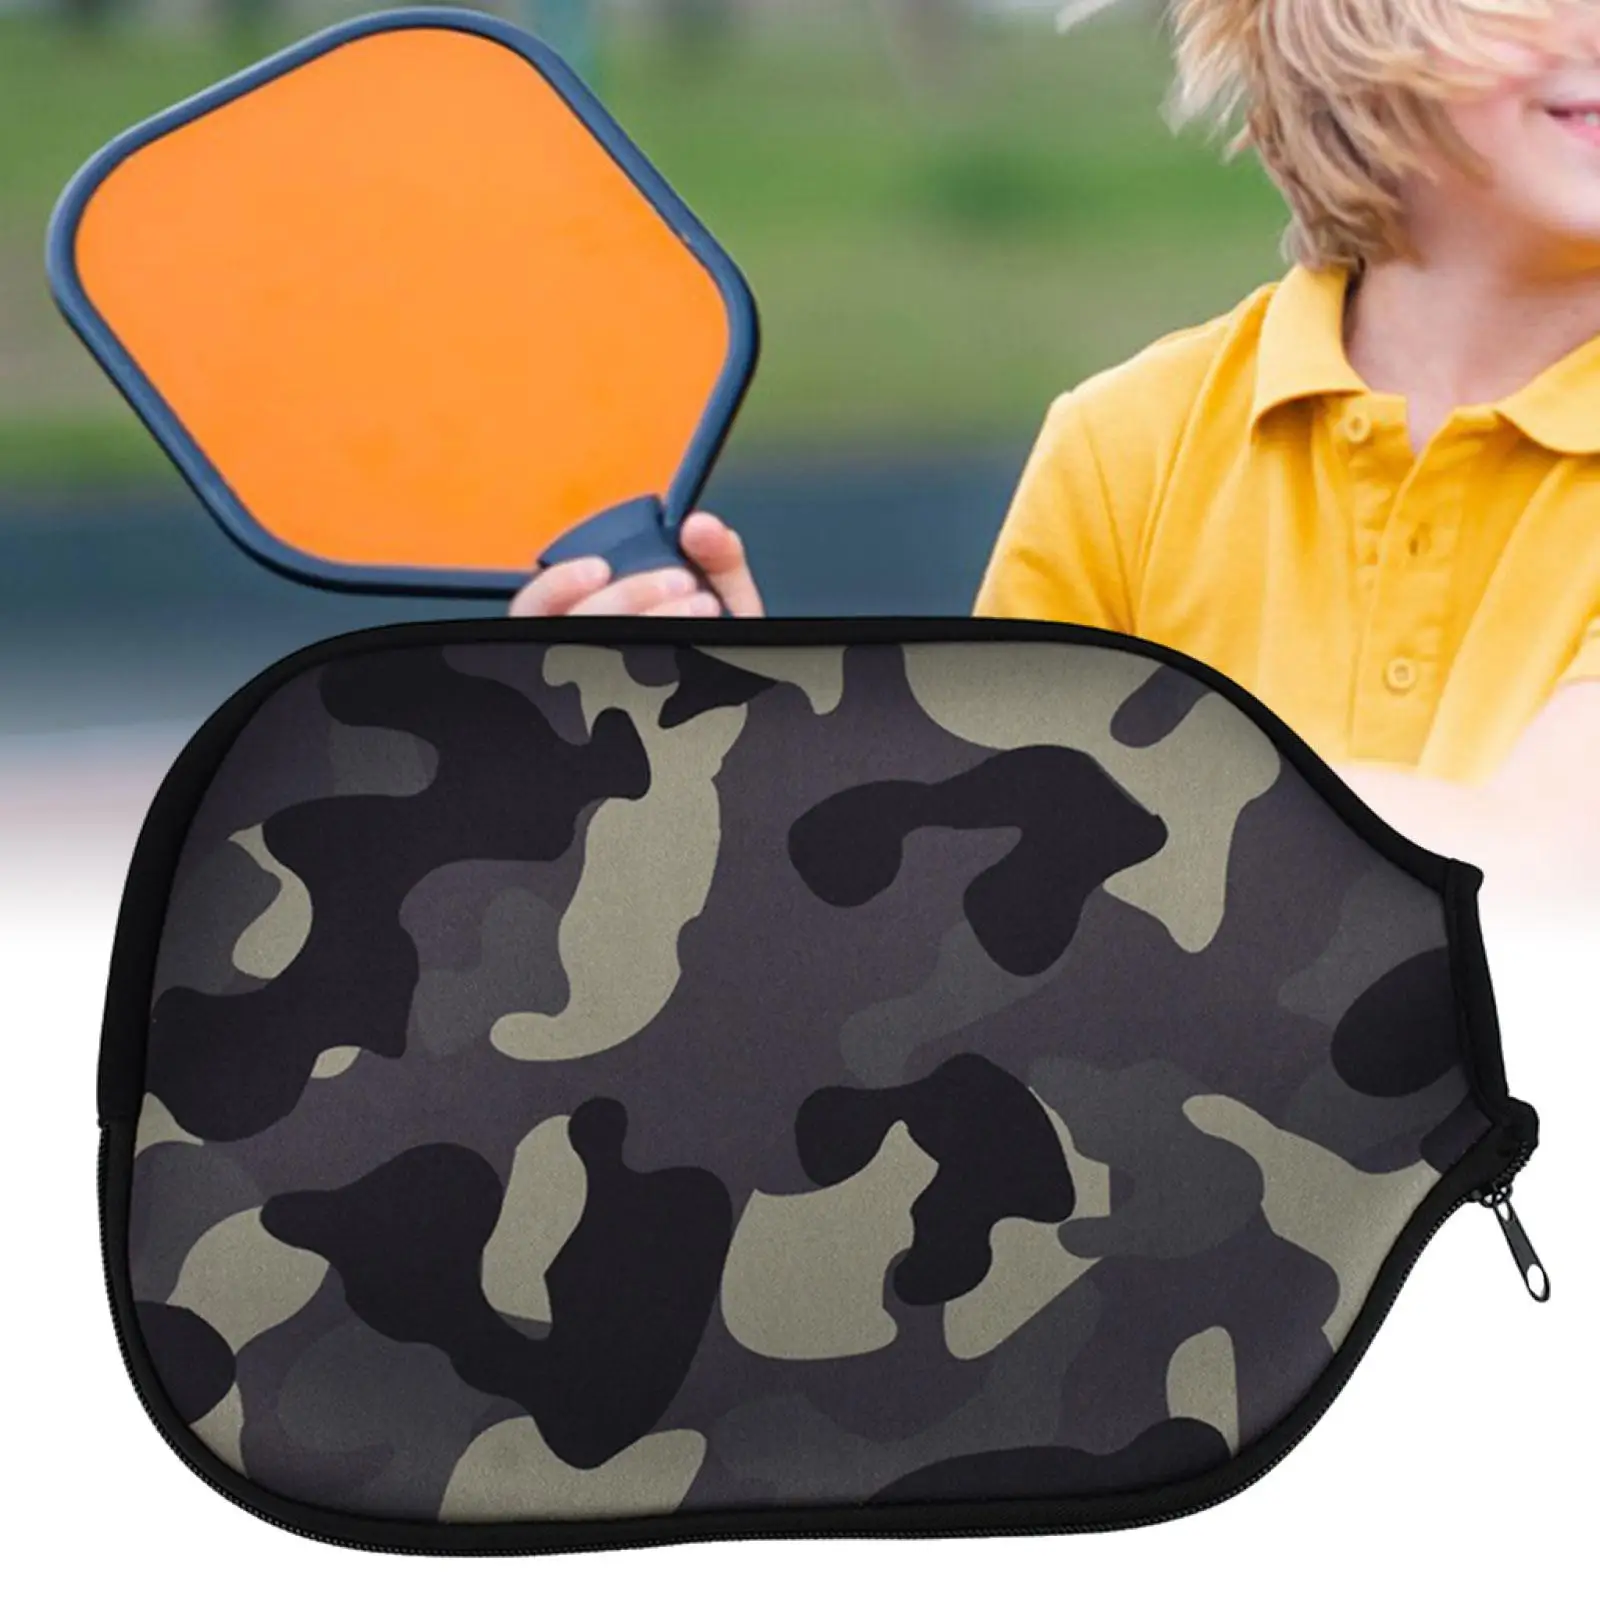 Neoprene Pickleball Racket Cover Protective Zipper Fits Most Paddle Pouch Racket Sleeve Racket Cover Case for Outdoor